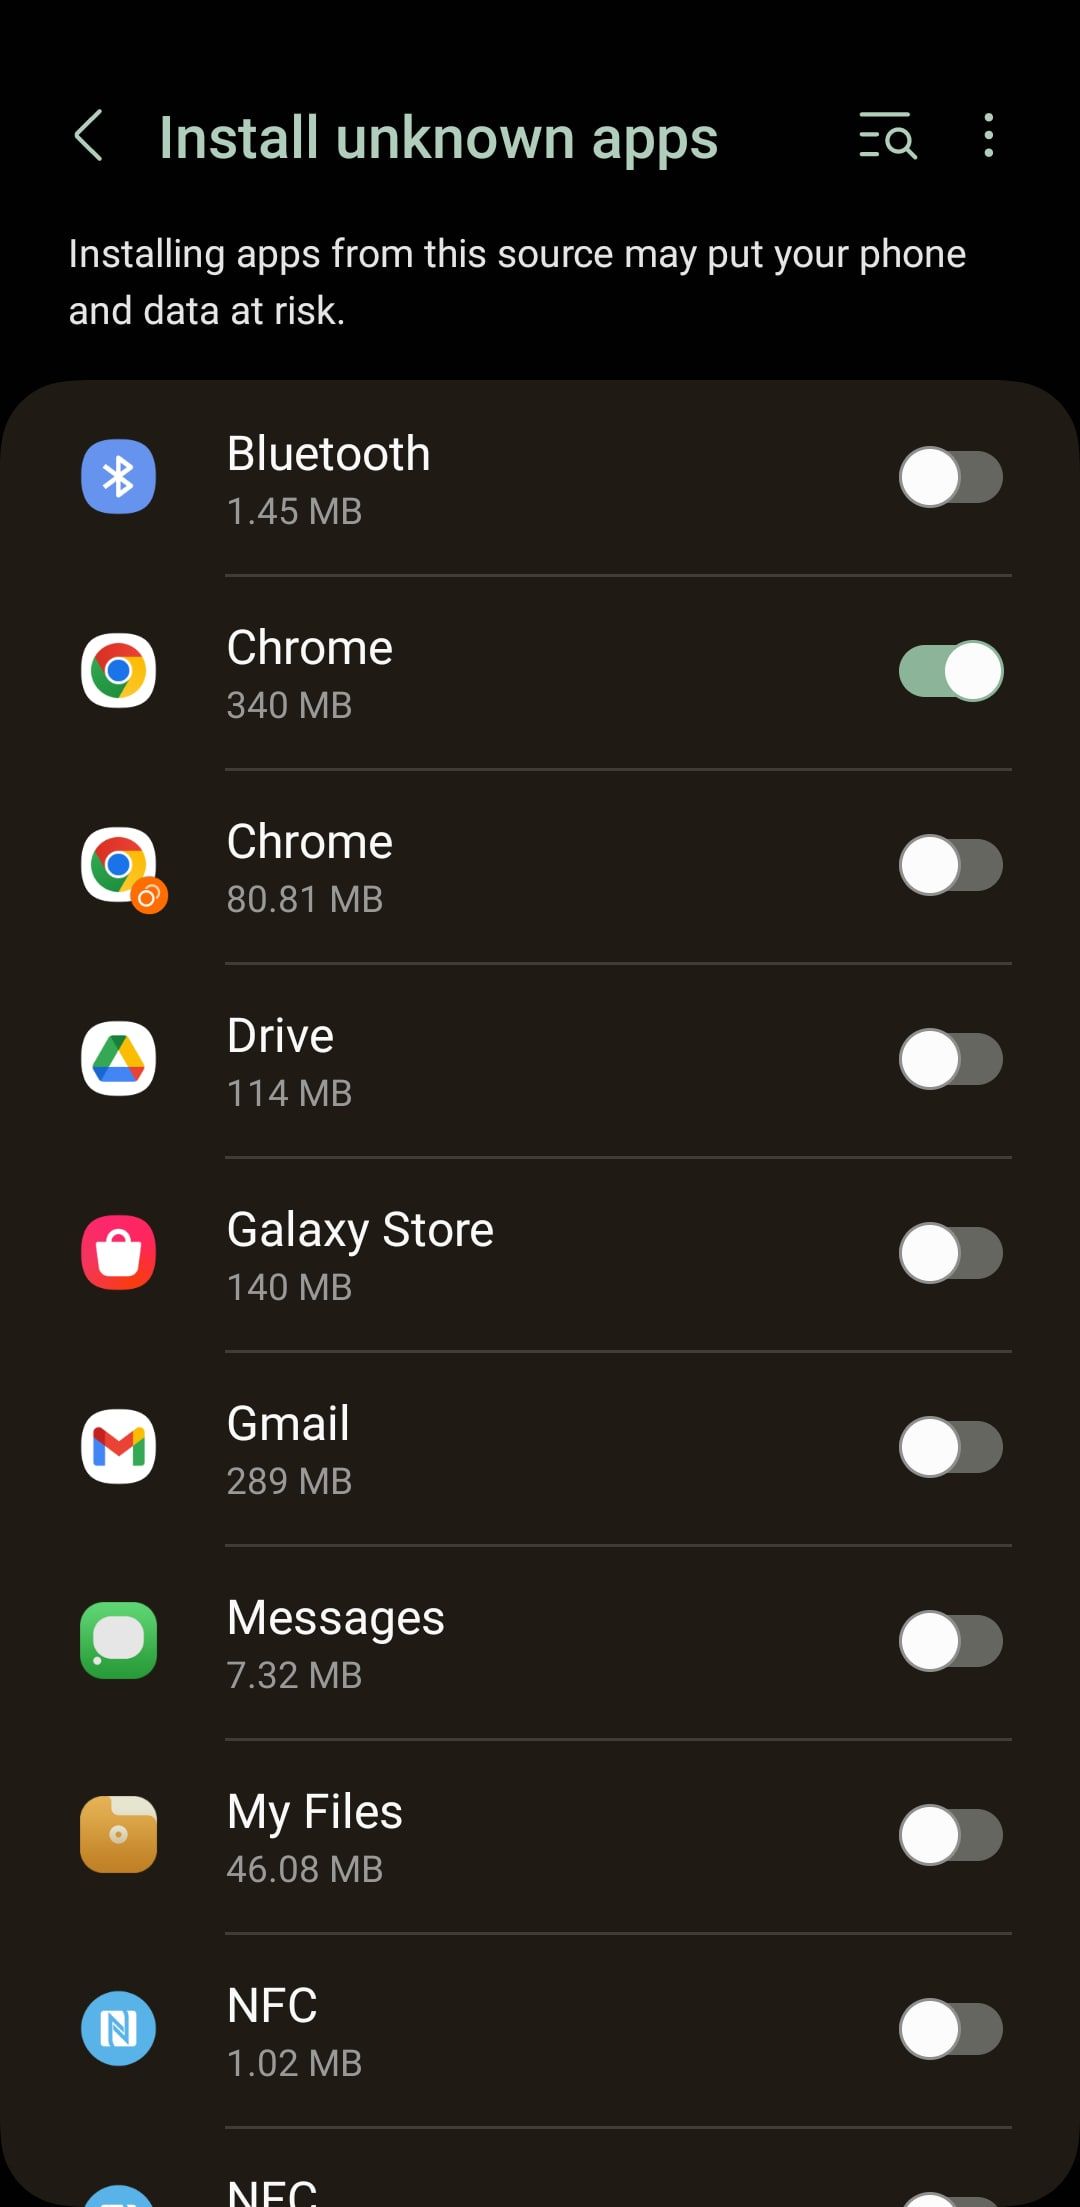 Install unknown apps menu on Android phone 